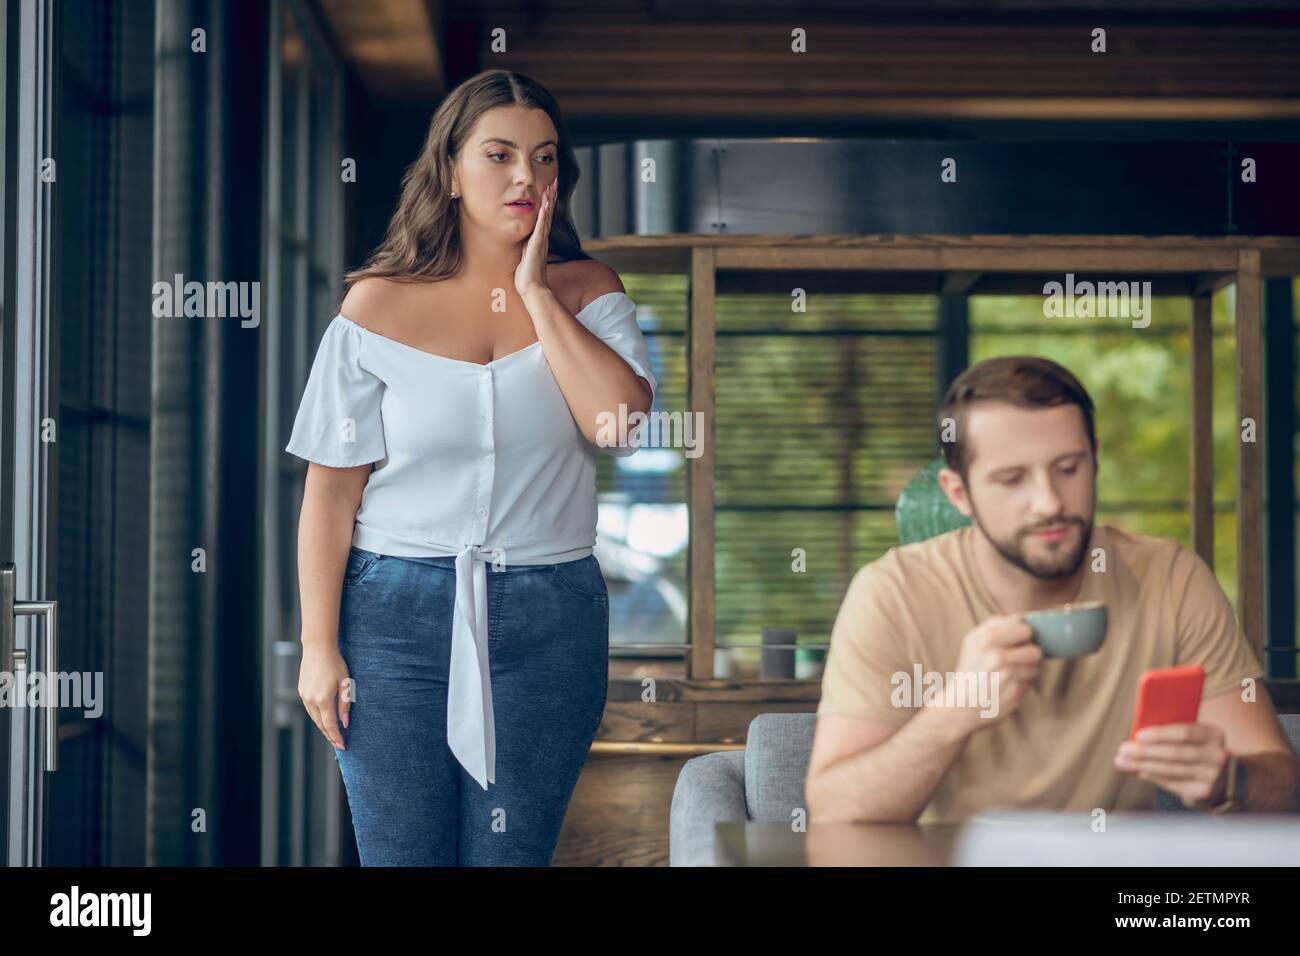 Surprised woman near table and man with smartphone Stock Photo